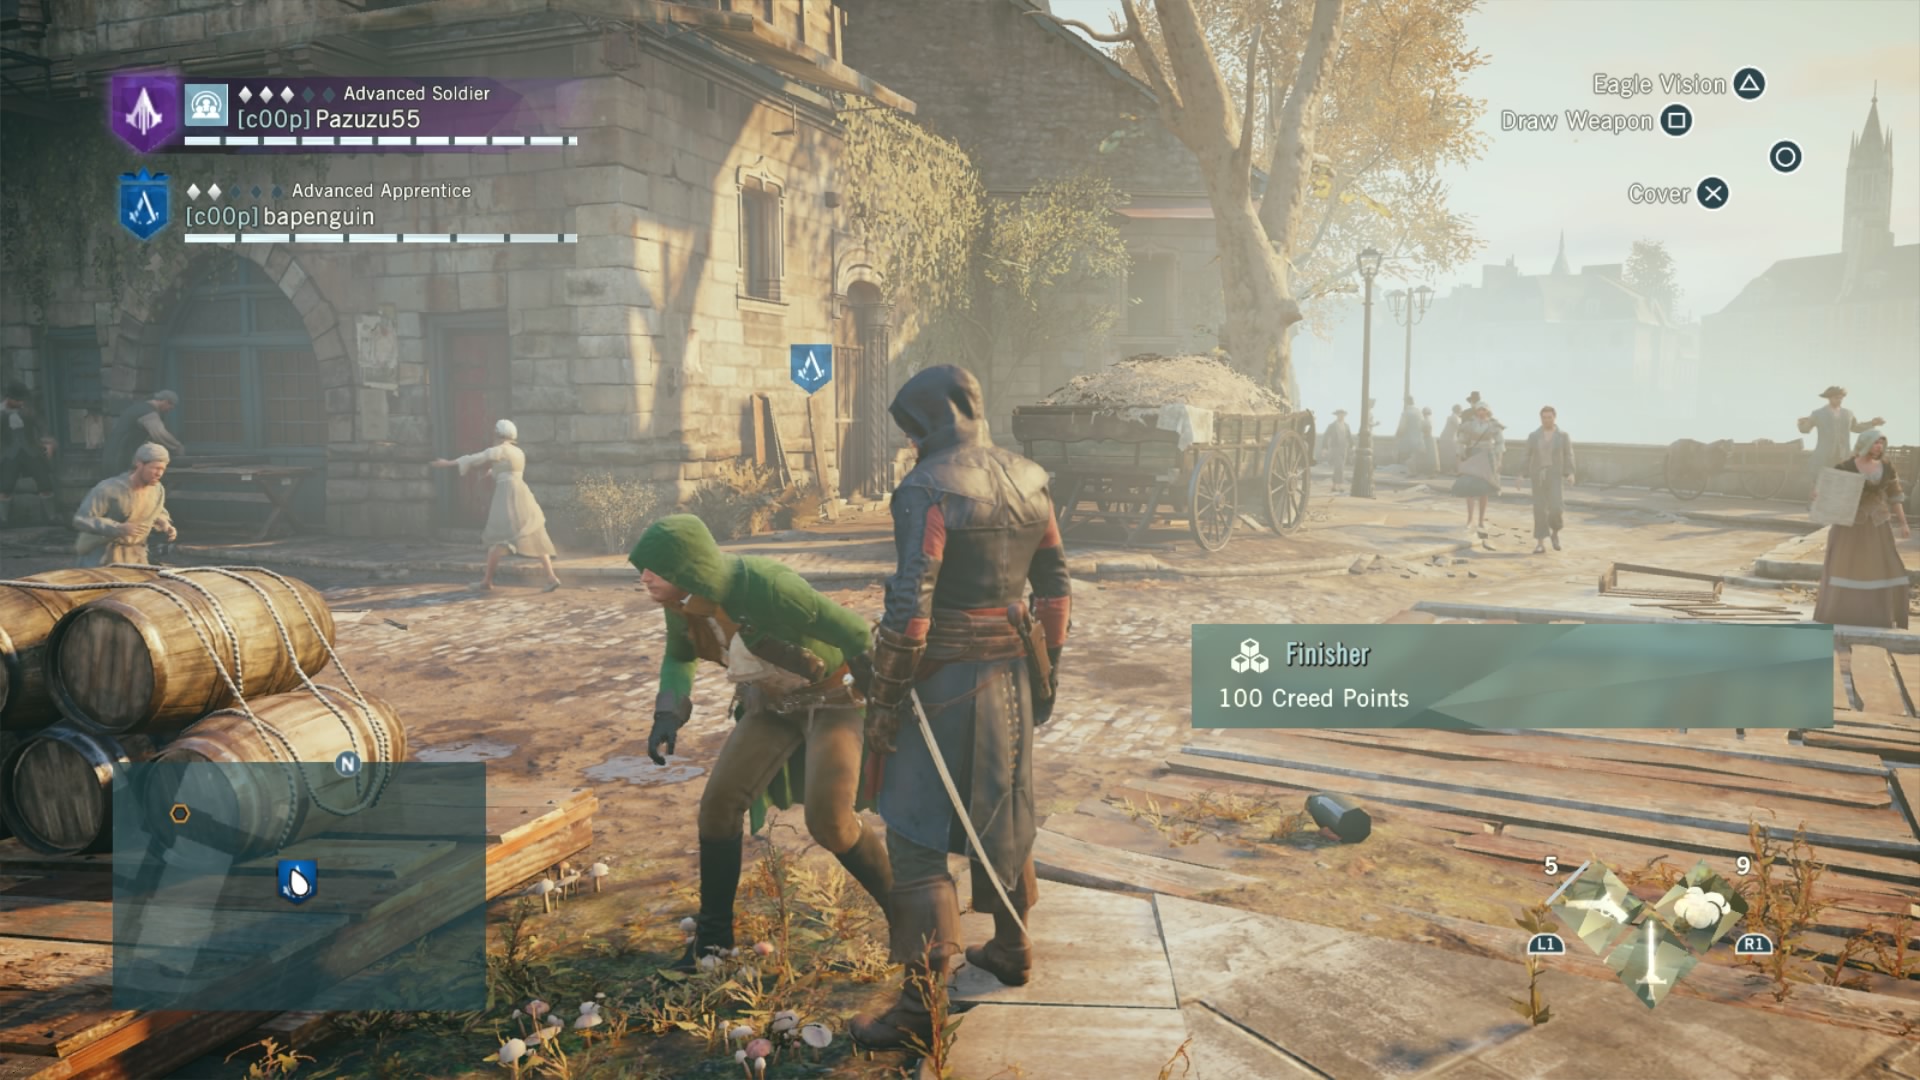 Assassin's Creed: Unity Played By Celebrities in New Co-Op Video